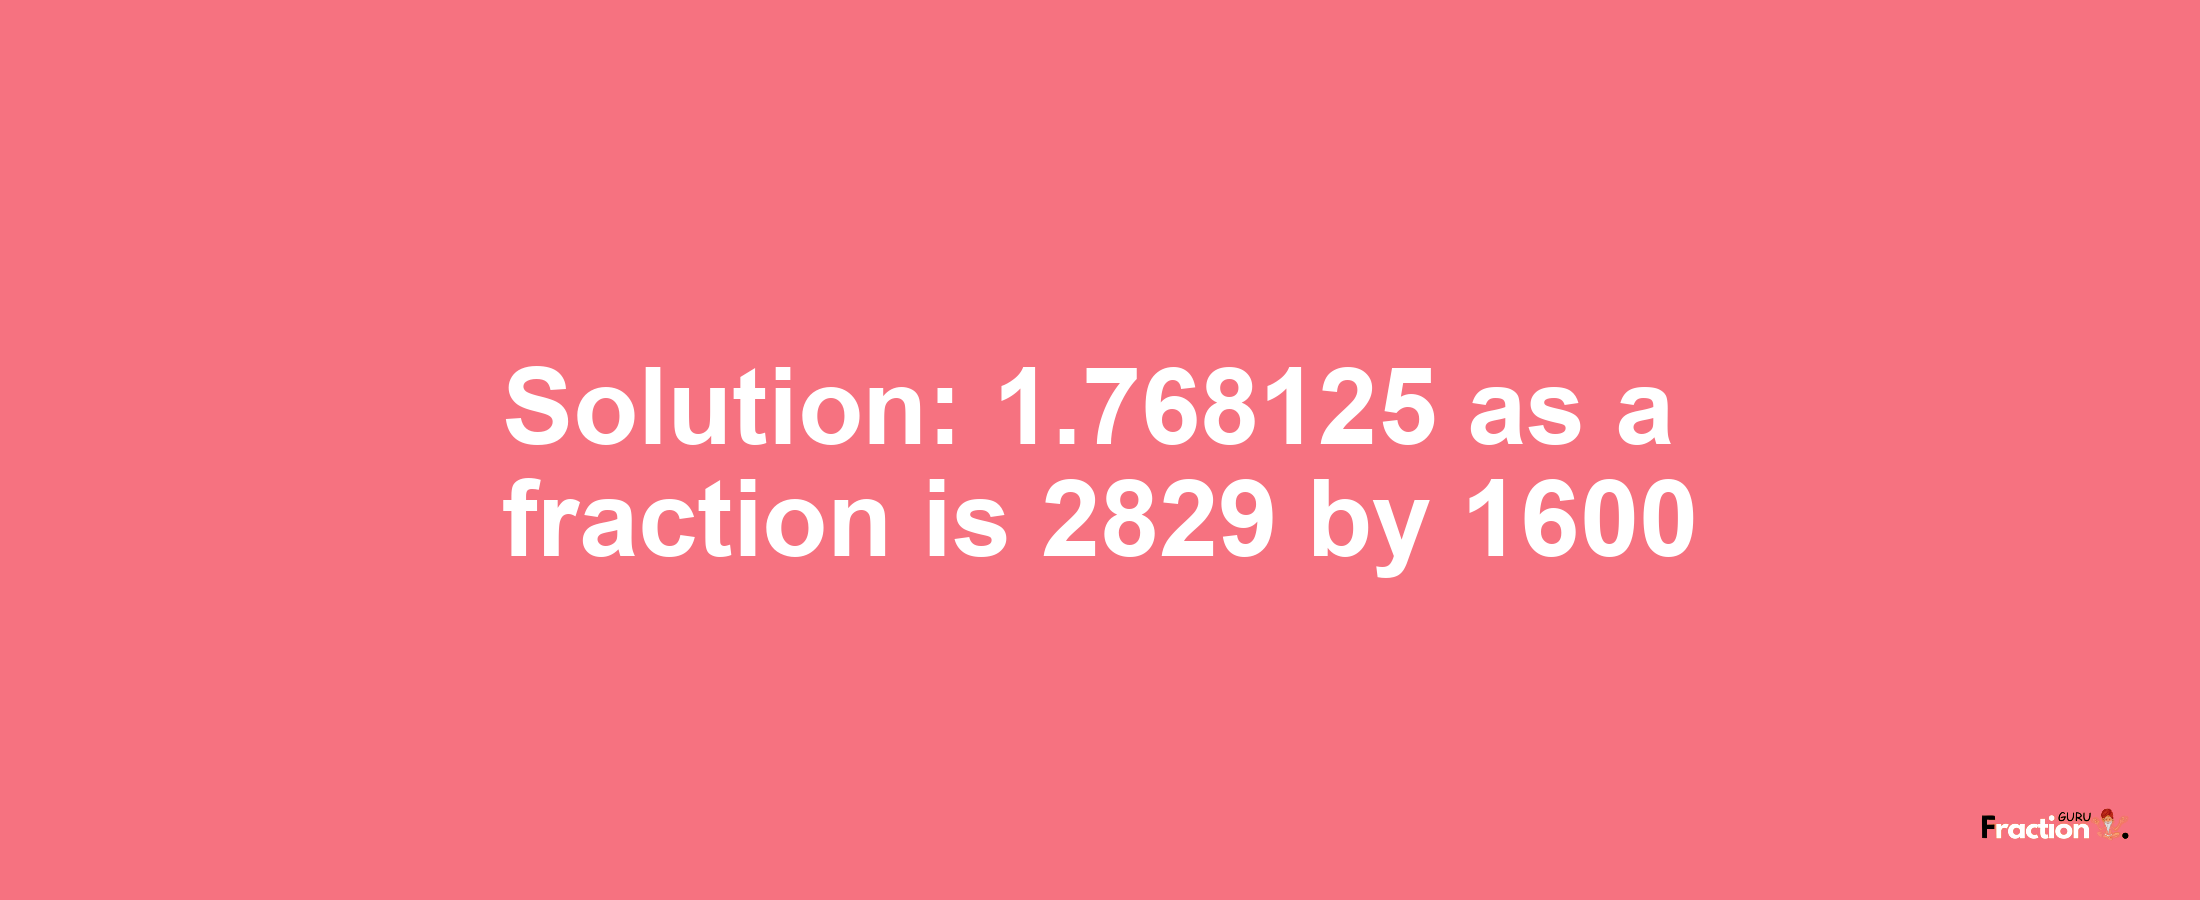 Solution:1.768125 as a fraction is 2829/1600